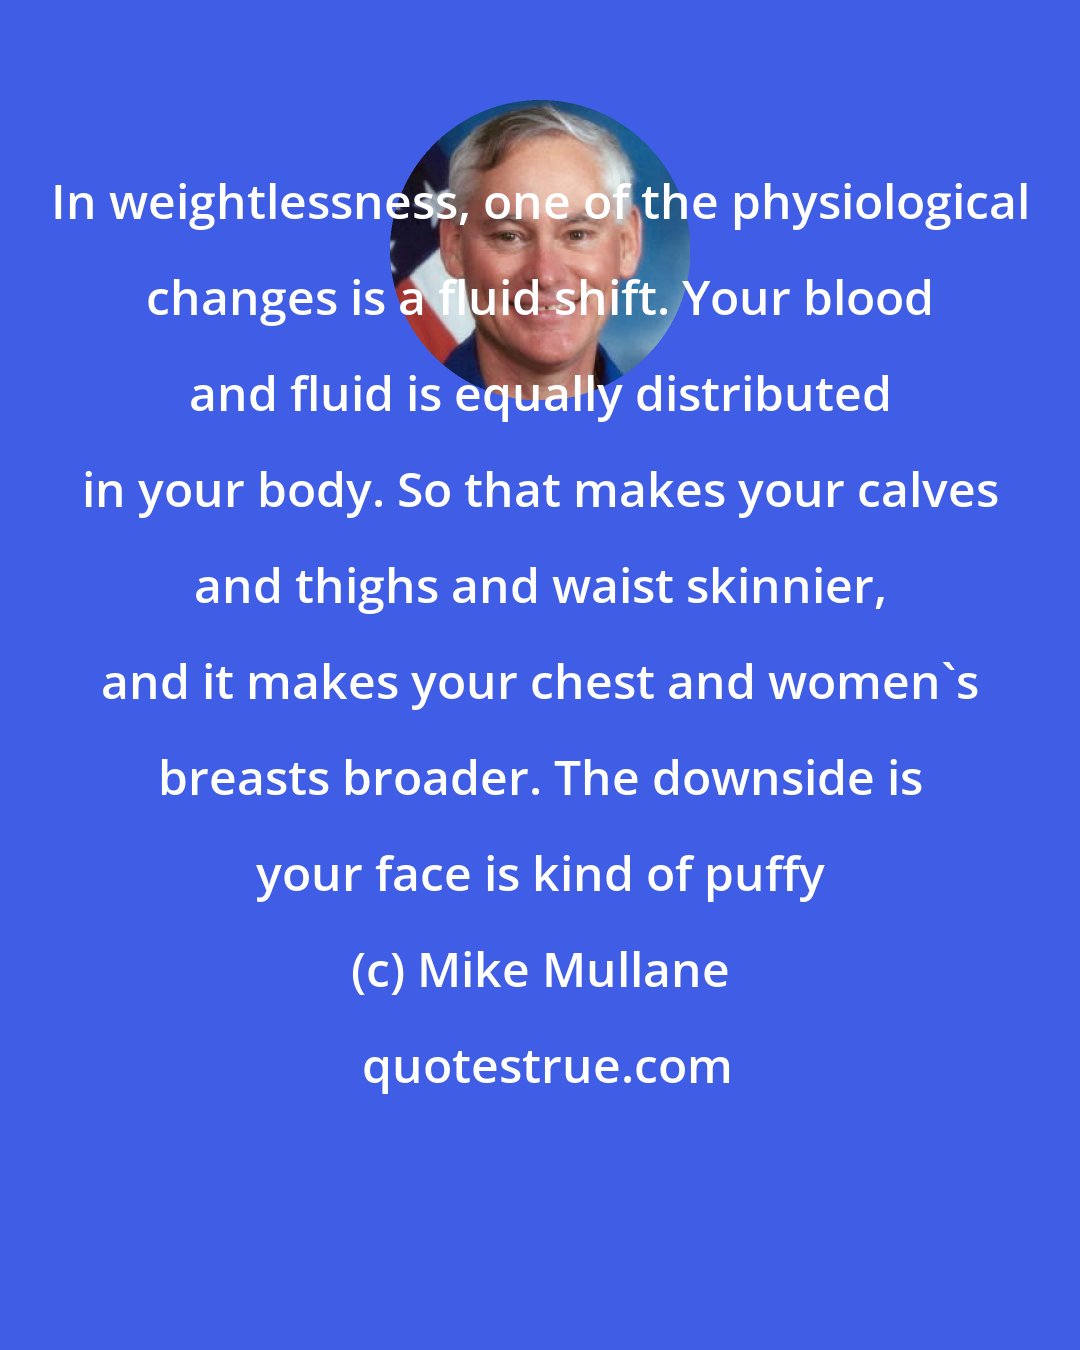 Mike Mullane: In weightlessness, one of the physiological changes is a fluid shift. Your blood and fluid is equally distributed in your body. So that makes your calves and thighs and waist skinnier, and it makes your chest and women's breasts broader. The downside is your face is kind of puffy